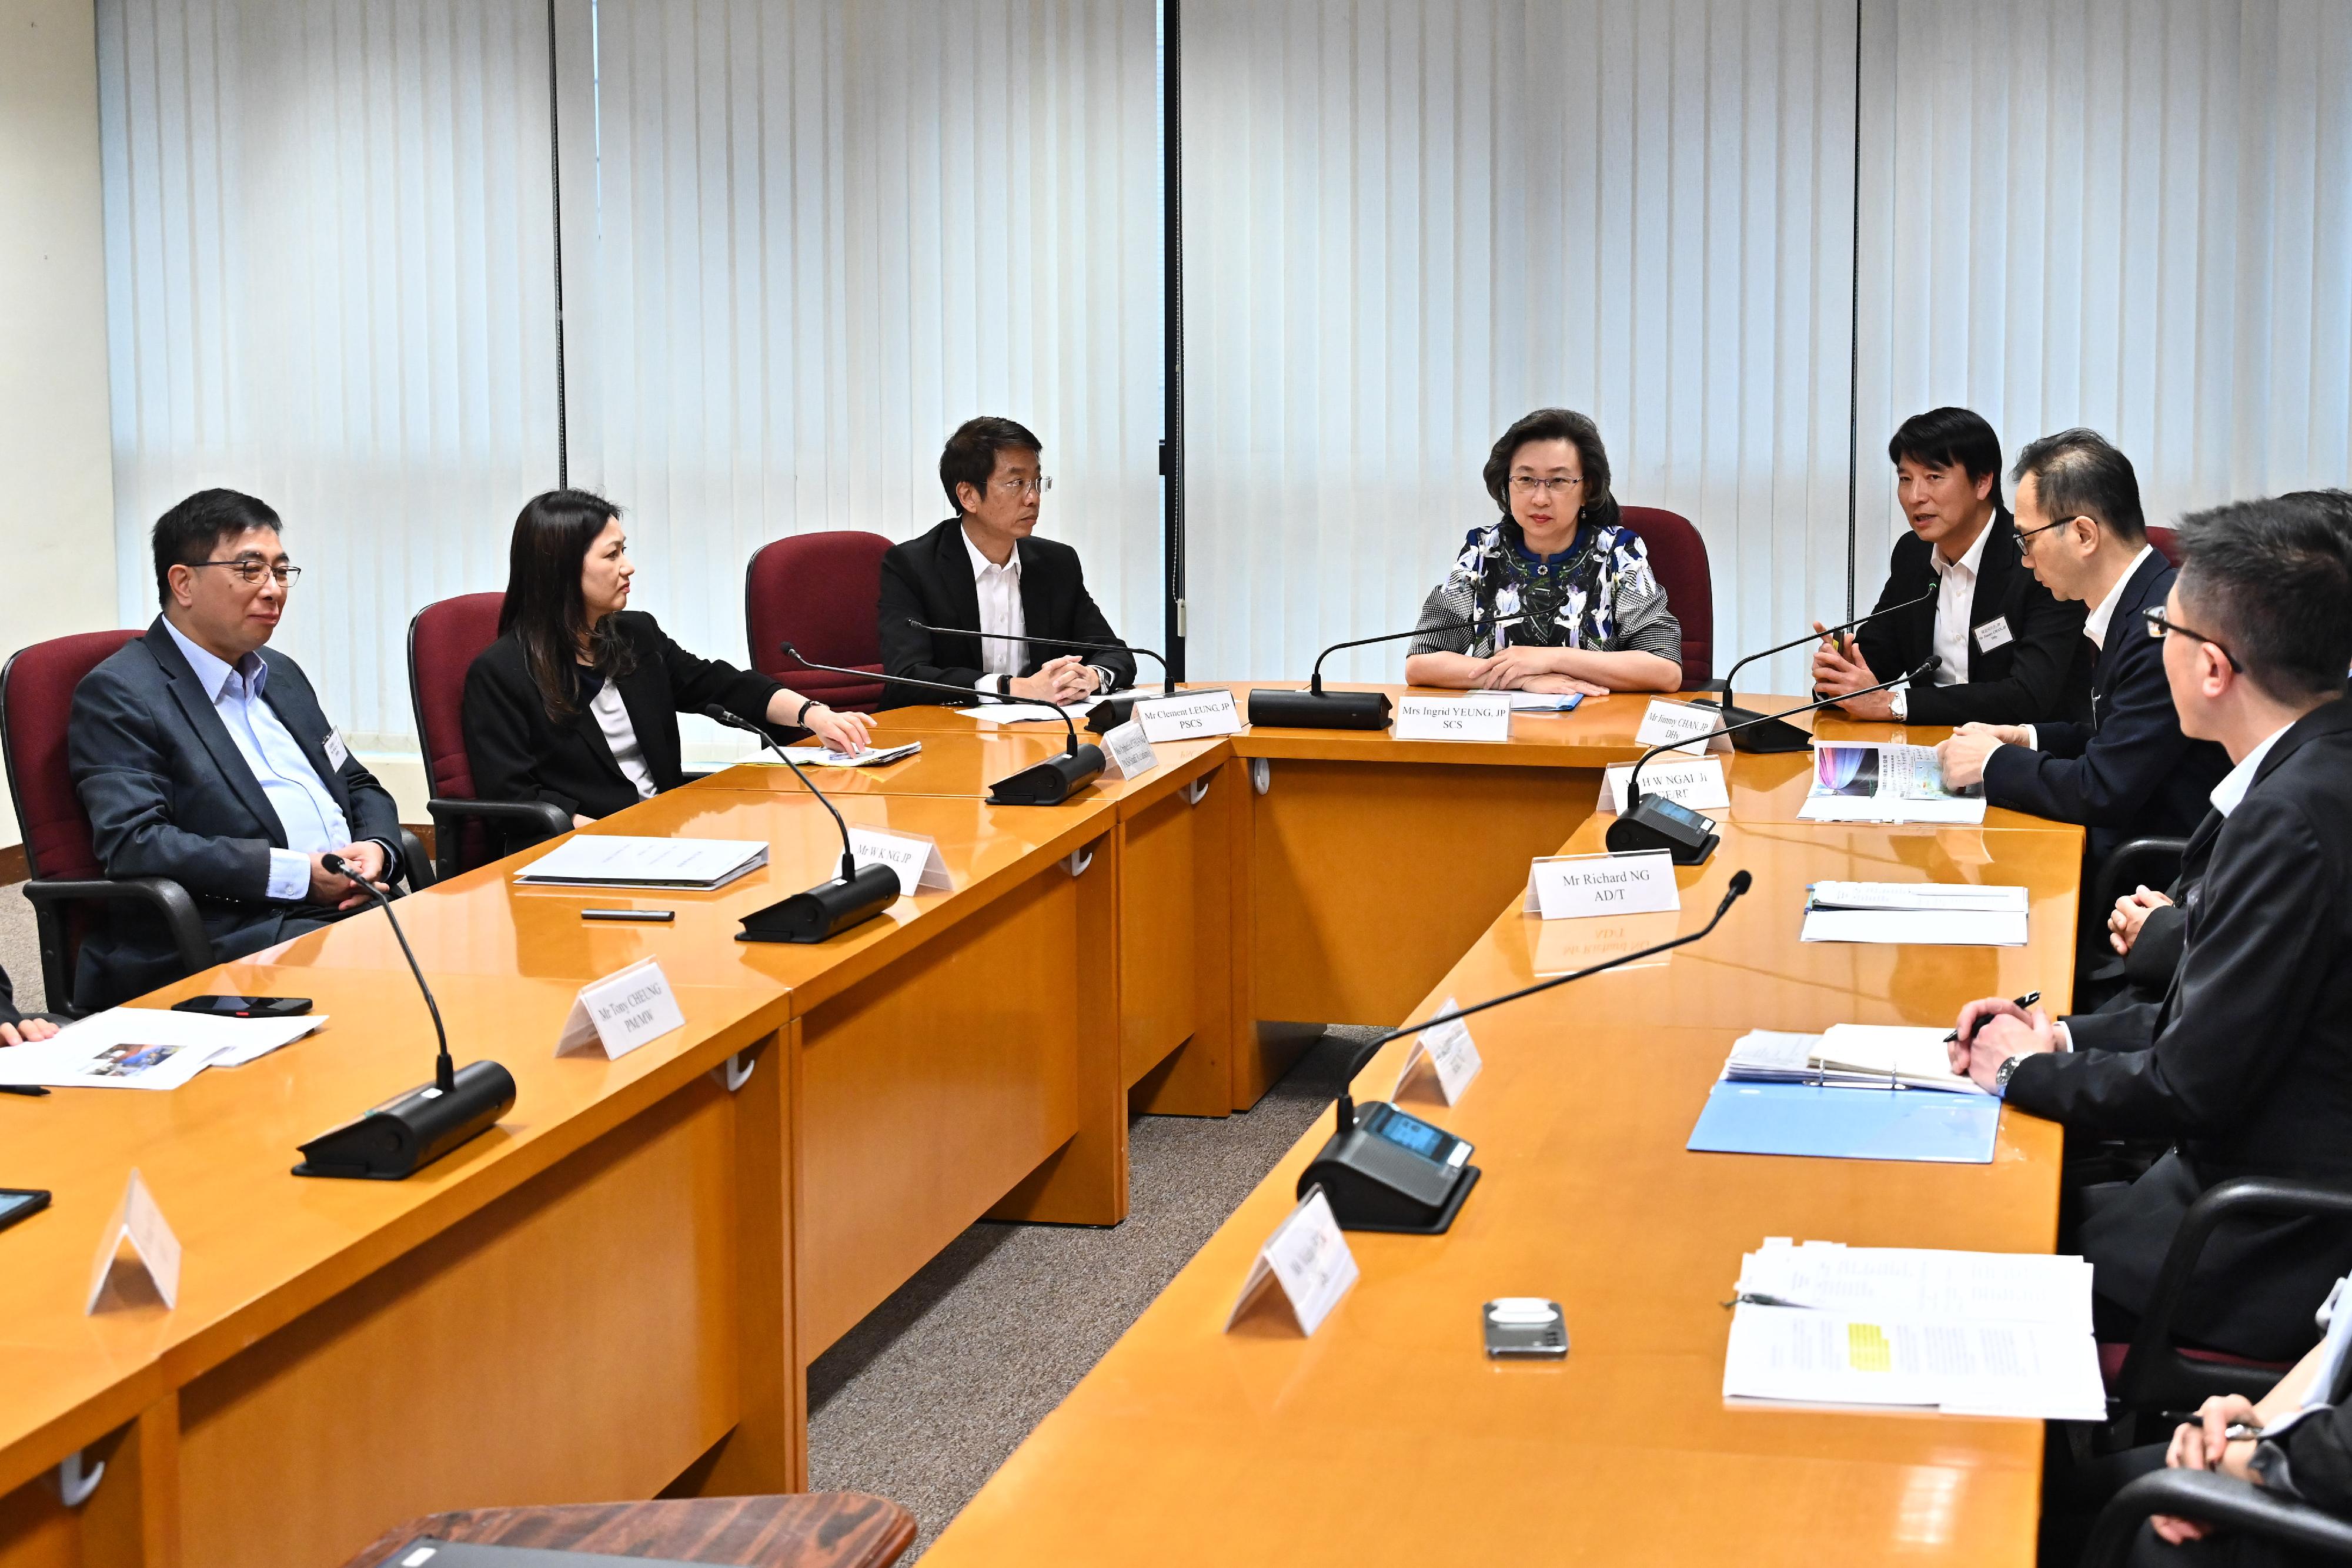 The Secretary for the Civil Service, Mrs Ingrid Yeung, visited the headquarters of the Highways Department today (May 8). Photo shows Mrs Yeung (fourth left) being briefed by the Director of Highways, Mr Jimmy Chan (fifth left), and the directorate staff on the department's latest developments. Looking on is the Permanent Secretary for the Civil Service, Mr Clement Leung (third left).